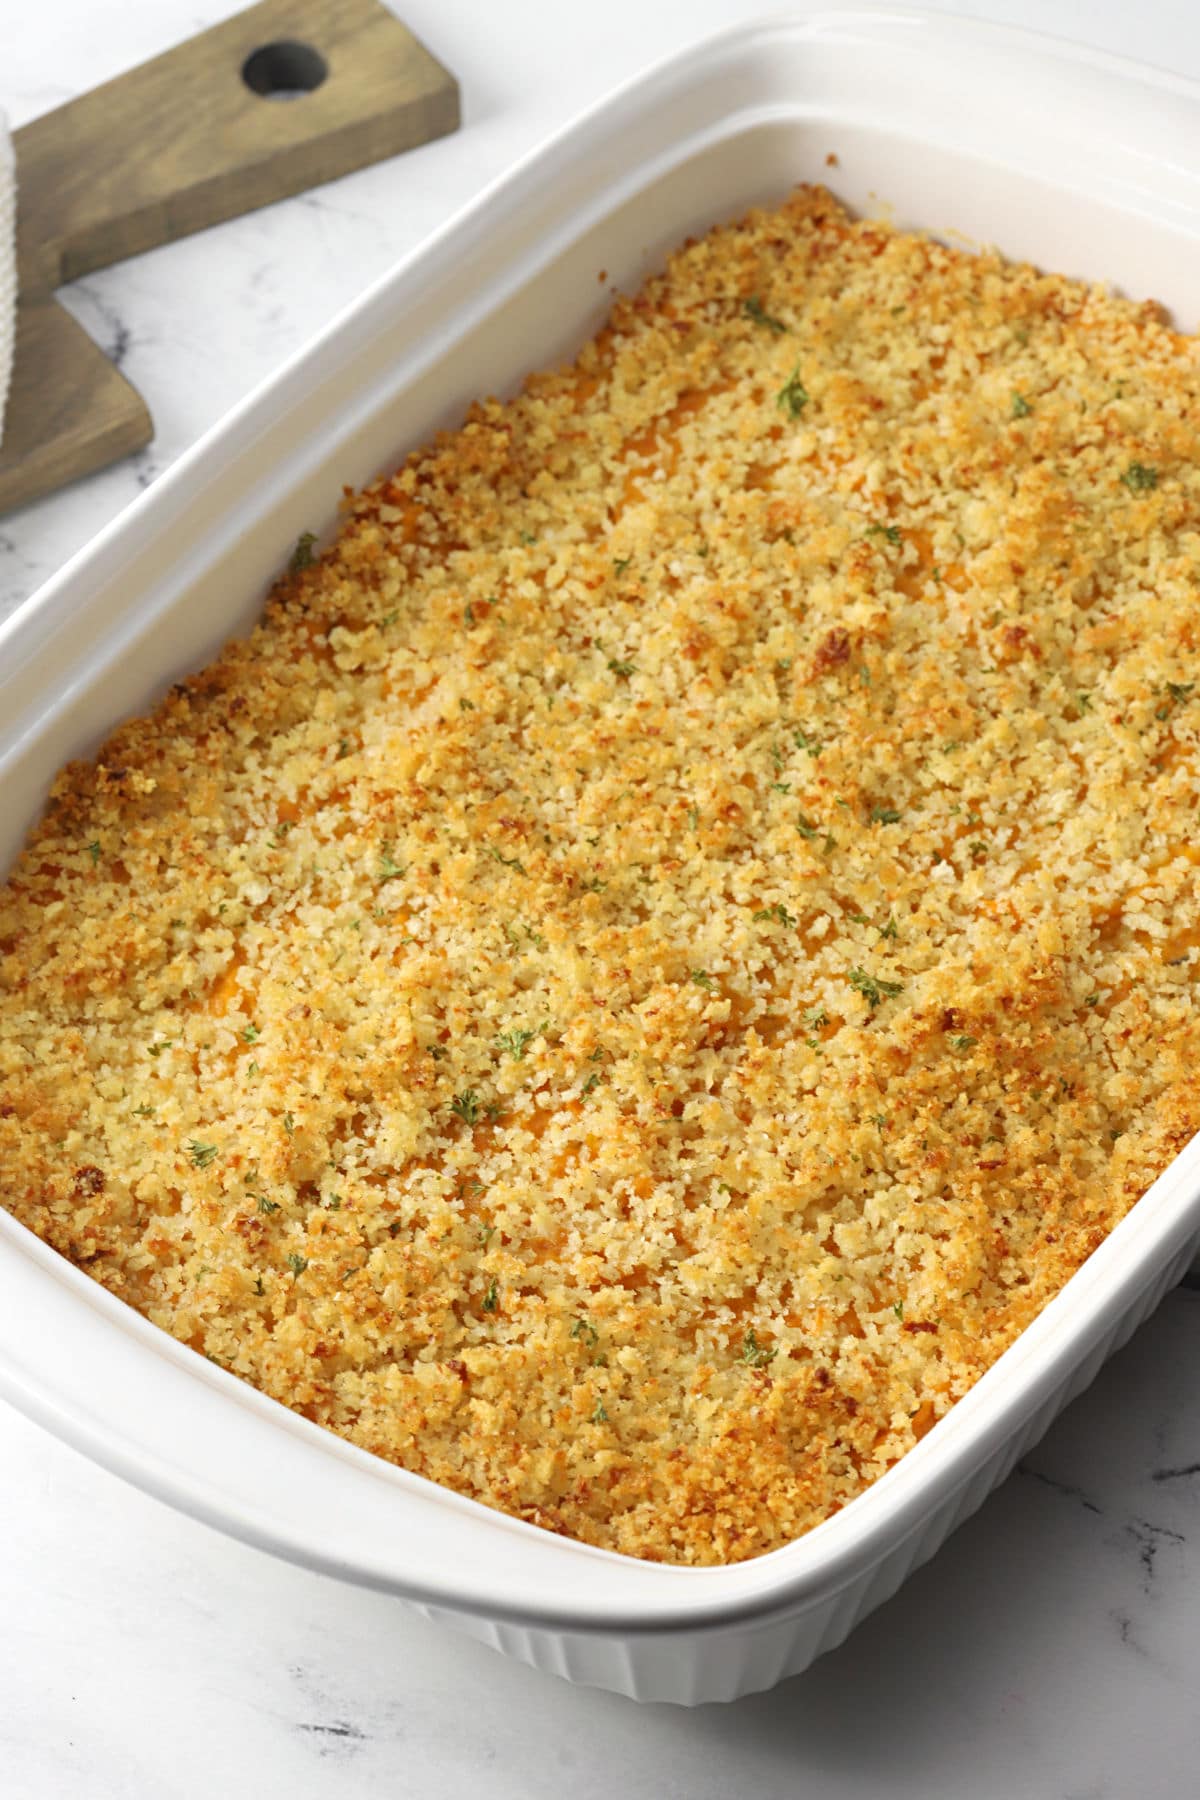 White casserole dish filled with baked sweet potato casserole.